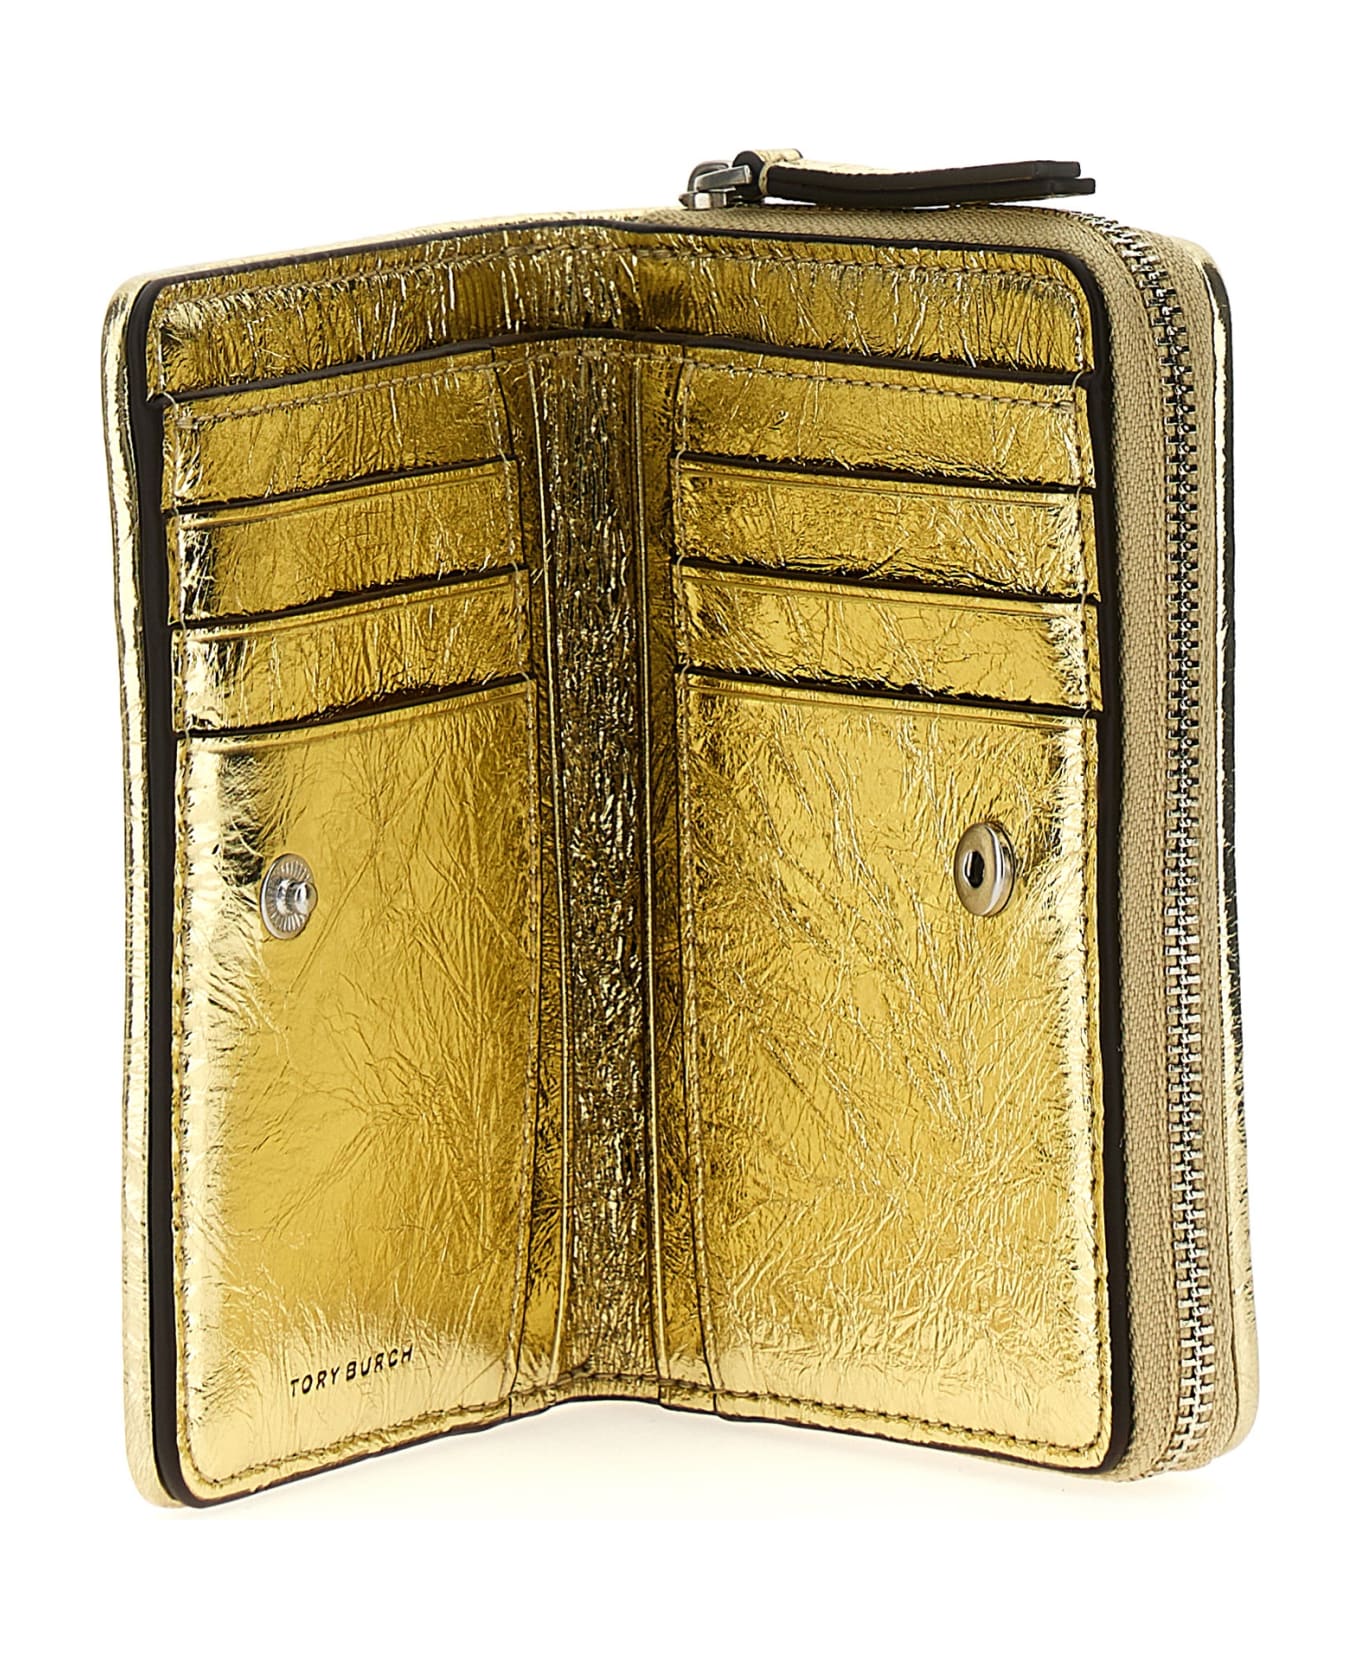 Tory Burch Fleming Soft Metallic Square Quilt Wallet - Gold 財布